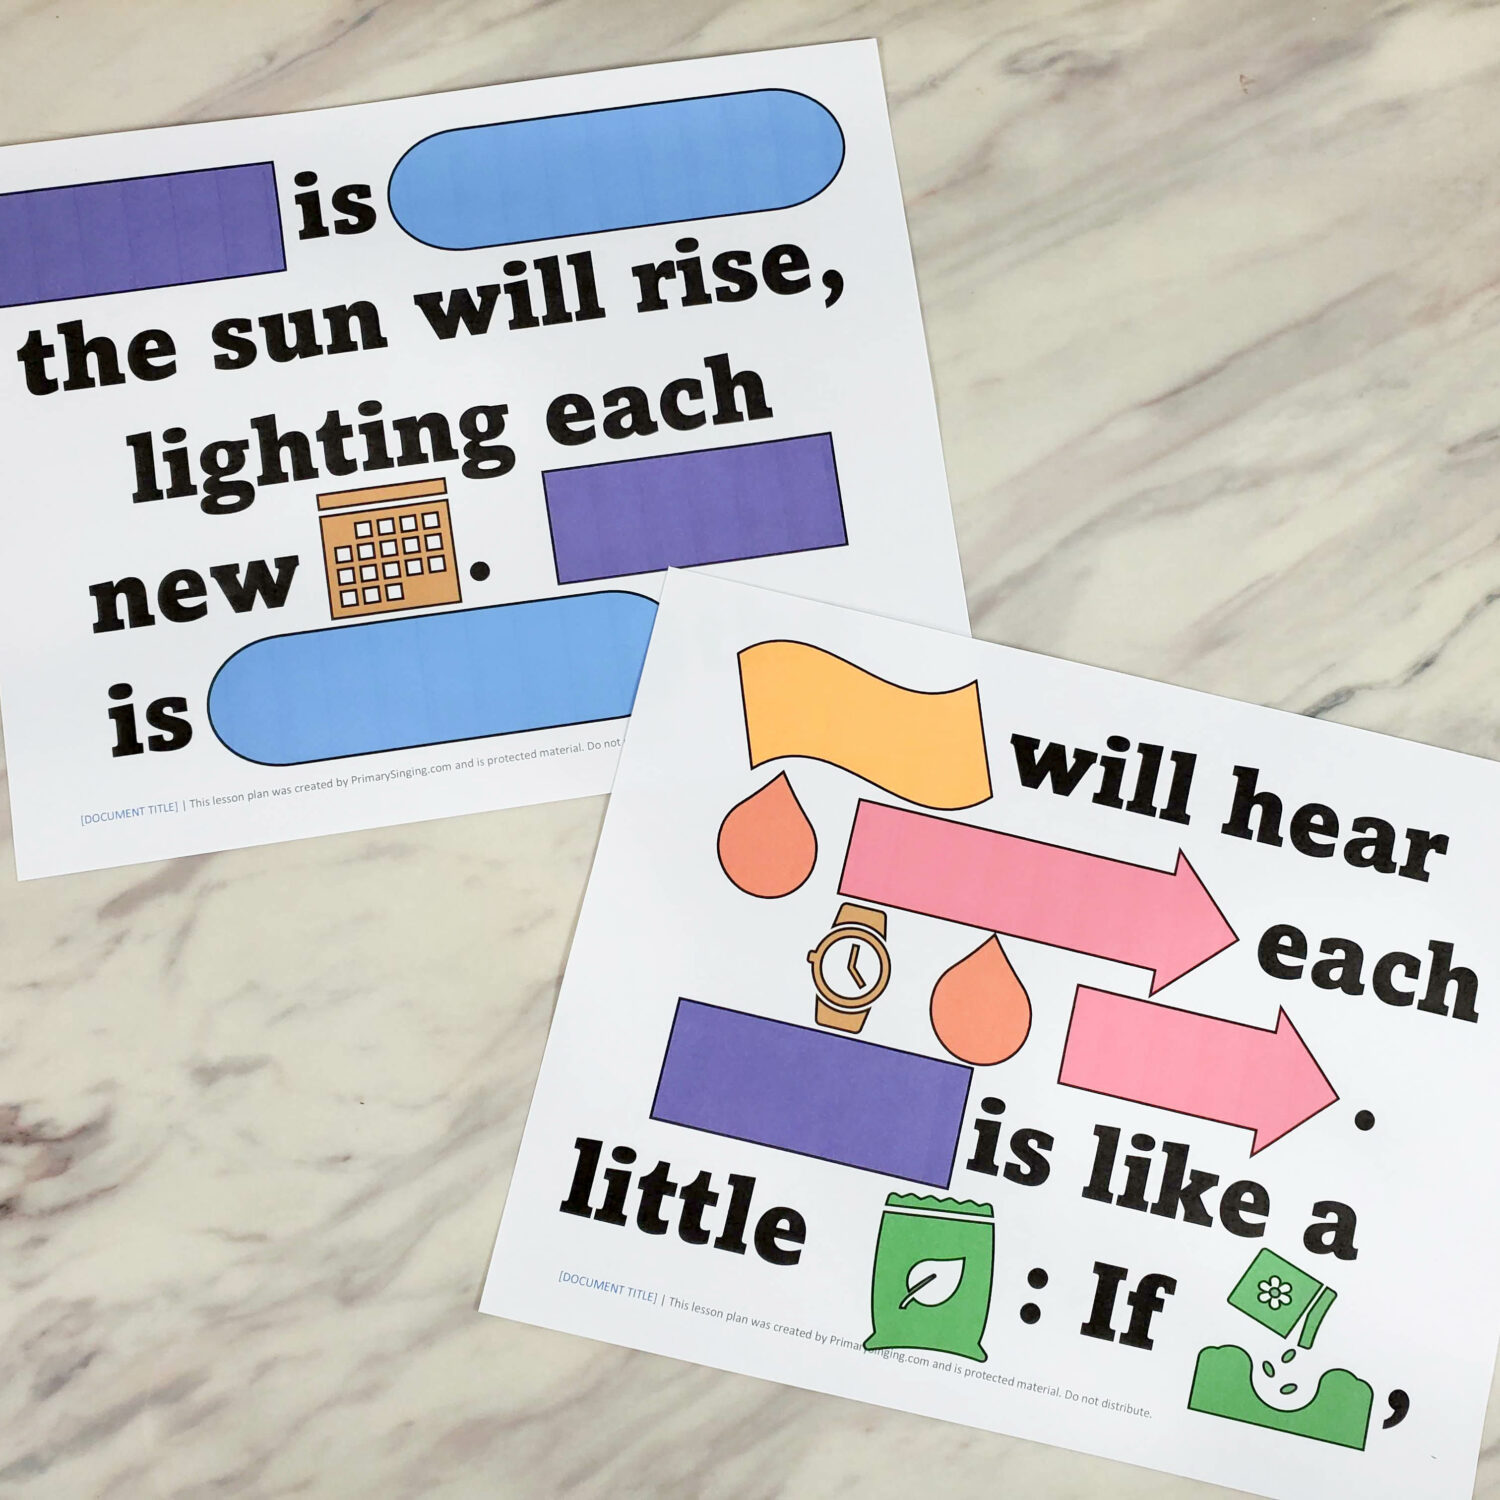 LDS Song Faith Color Clues singing time idea fun way to help teach the song line by line and decode the different colors and symbols to add in lots of fun and meaningful repetition! Great teaching aids for Primary music leaders / Primary choristers.